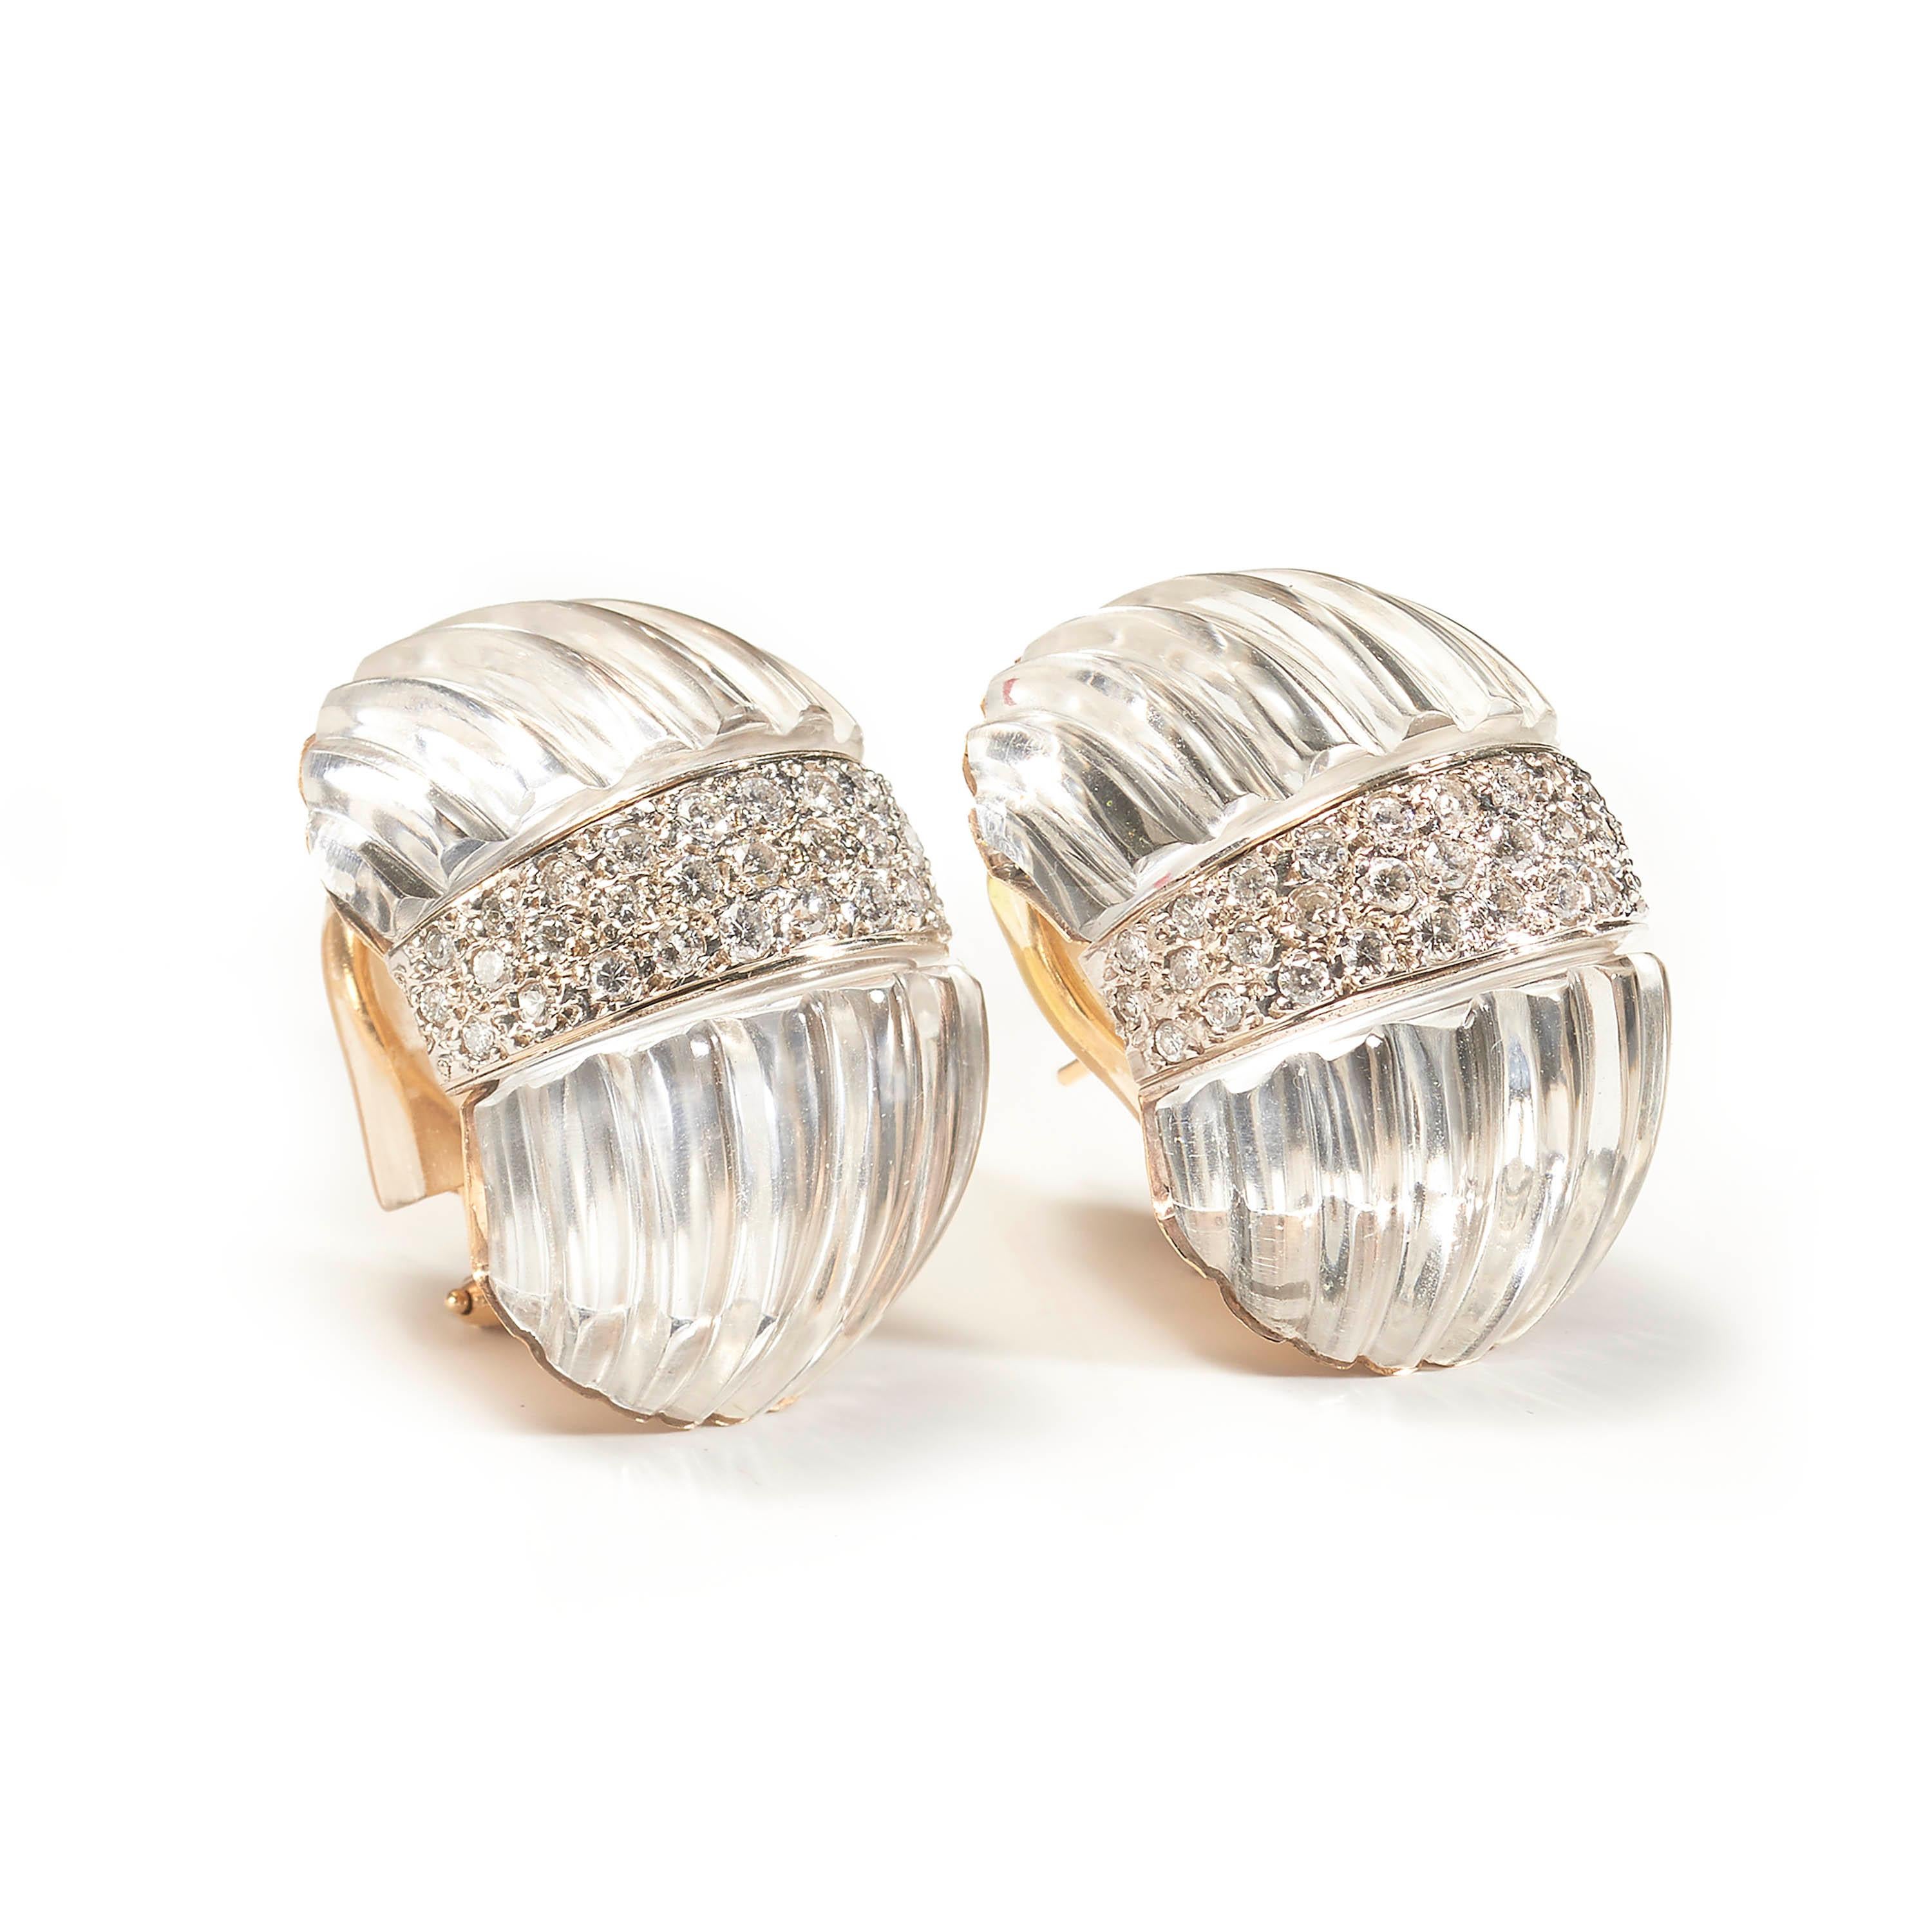 Contemporary Maz Carved Rock Crystal and Diamond Earrings, 2.25 Carats For Sale